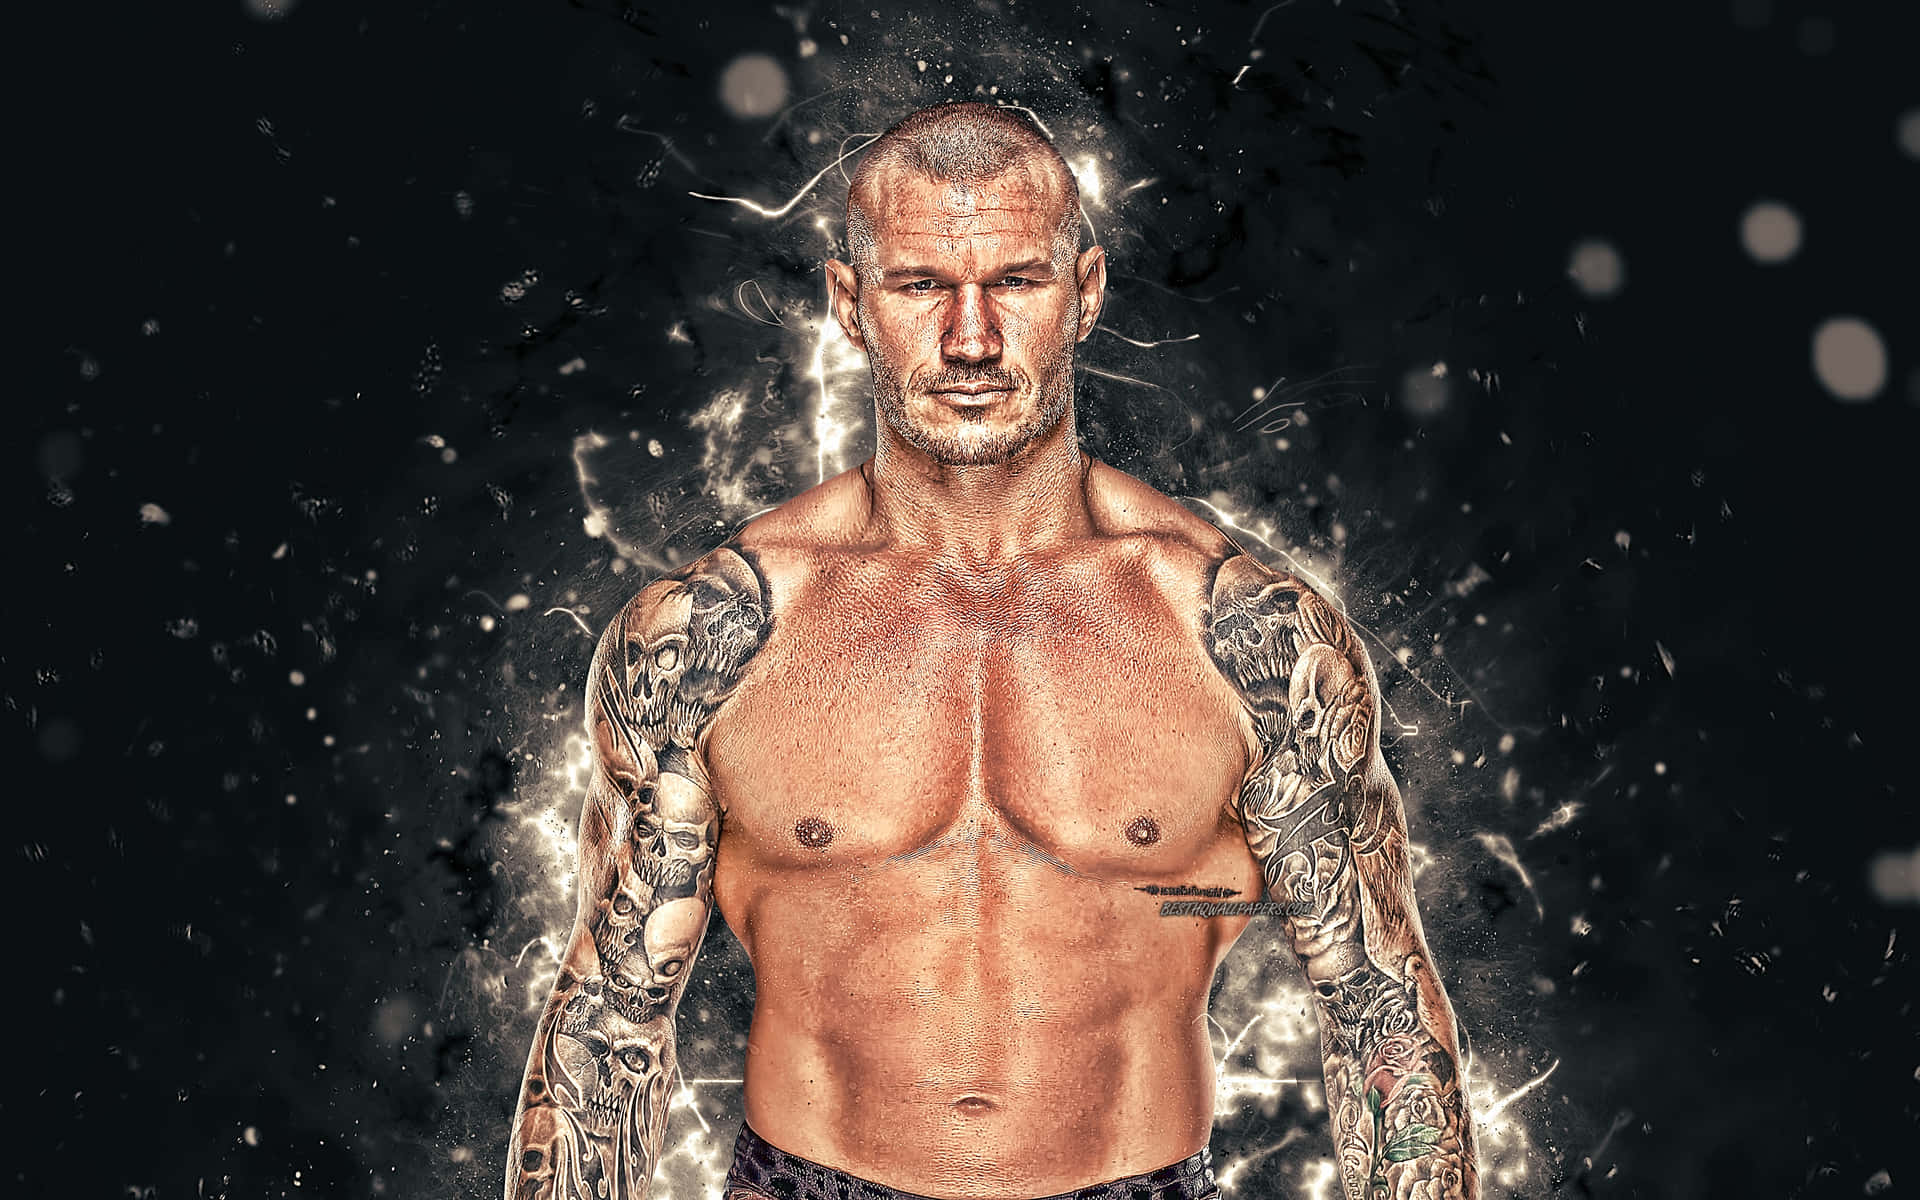 Wwe Superstar Randy Orton Showing Off His Championship Belt. Background